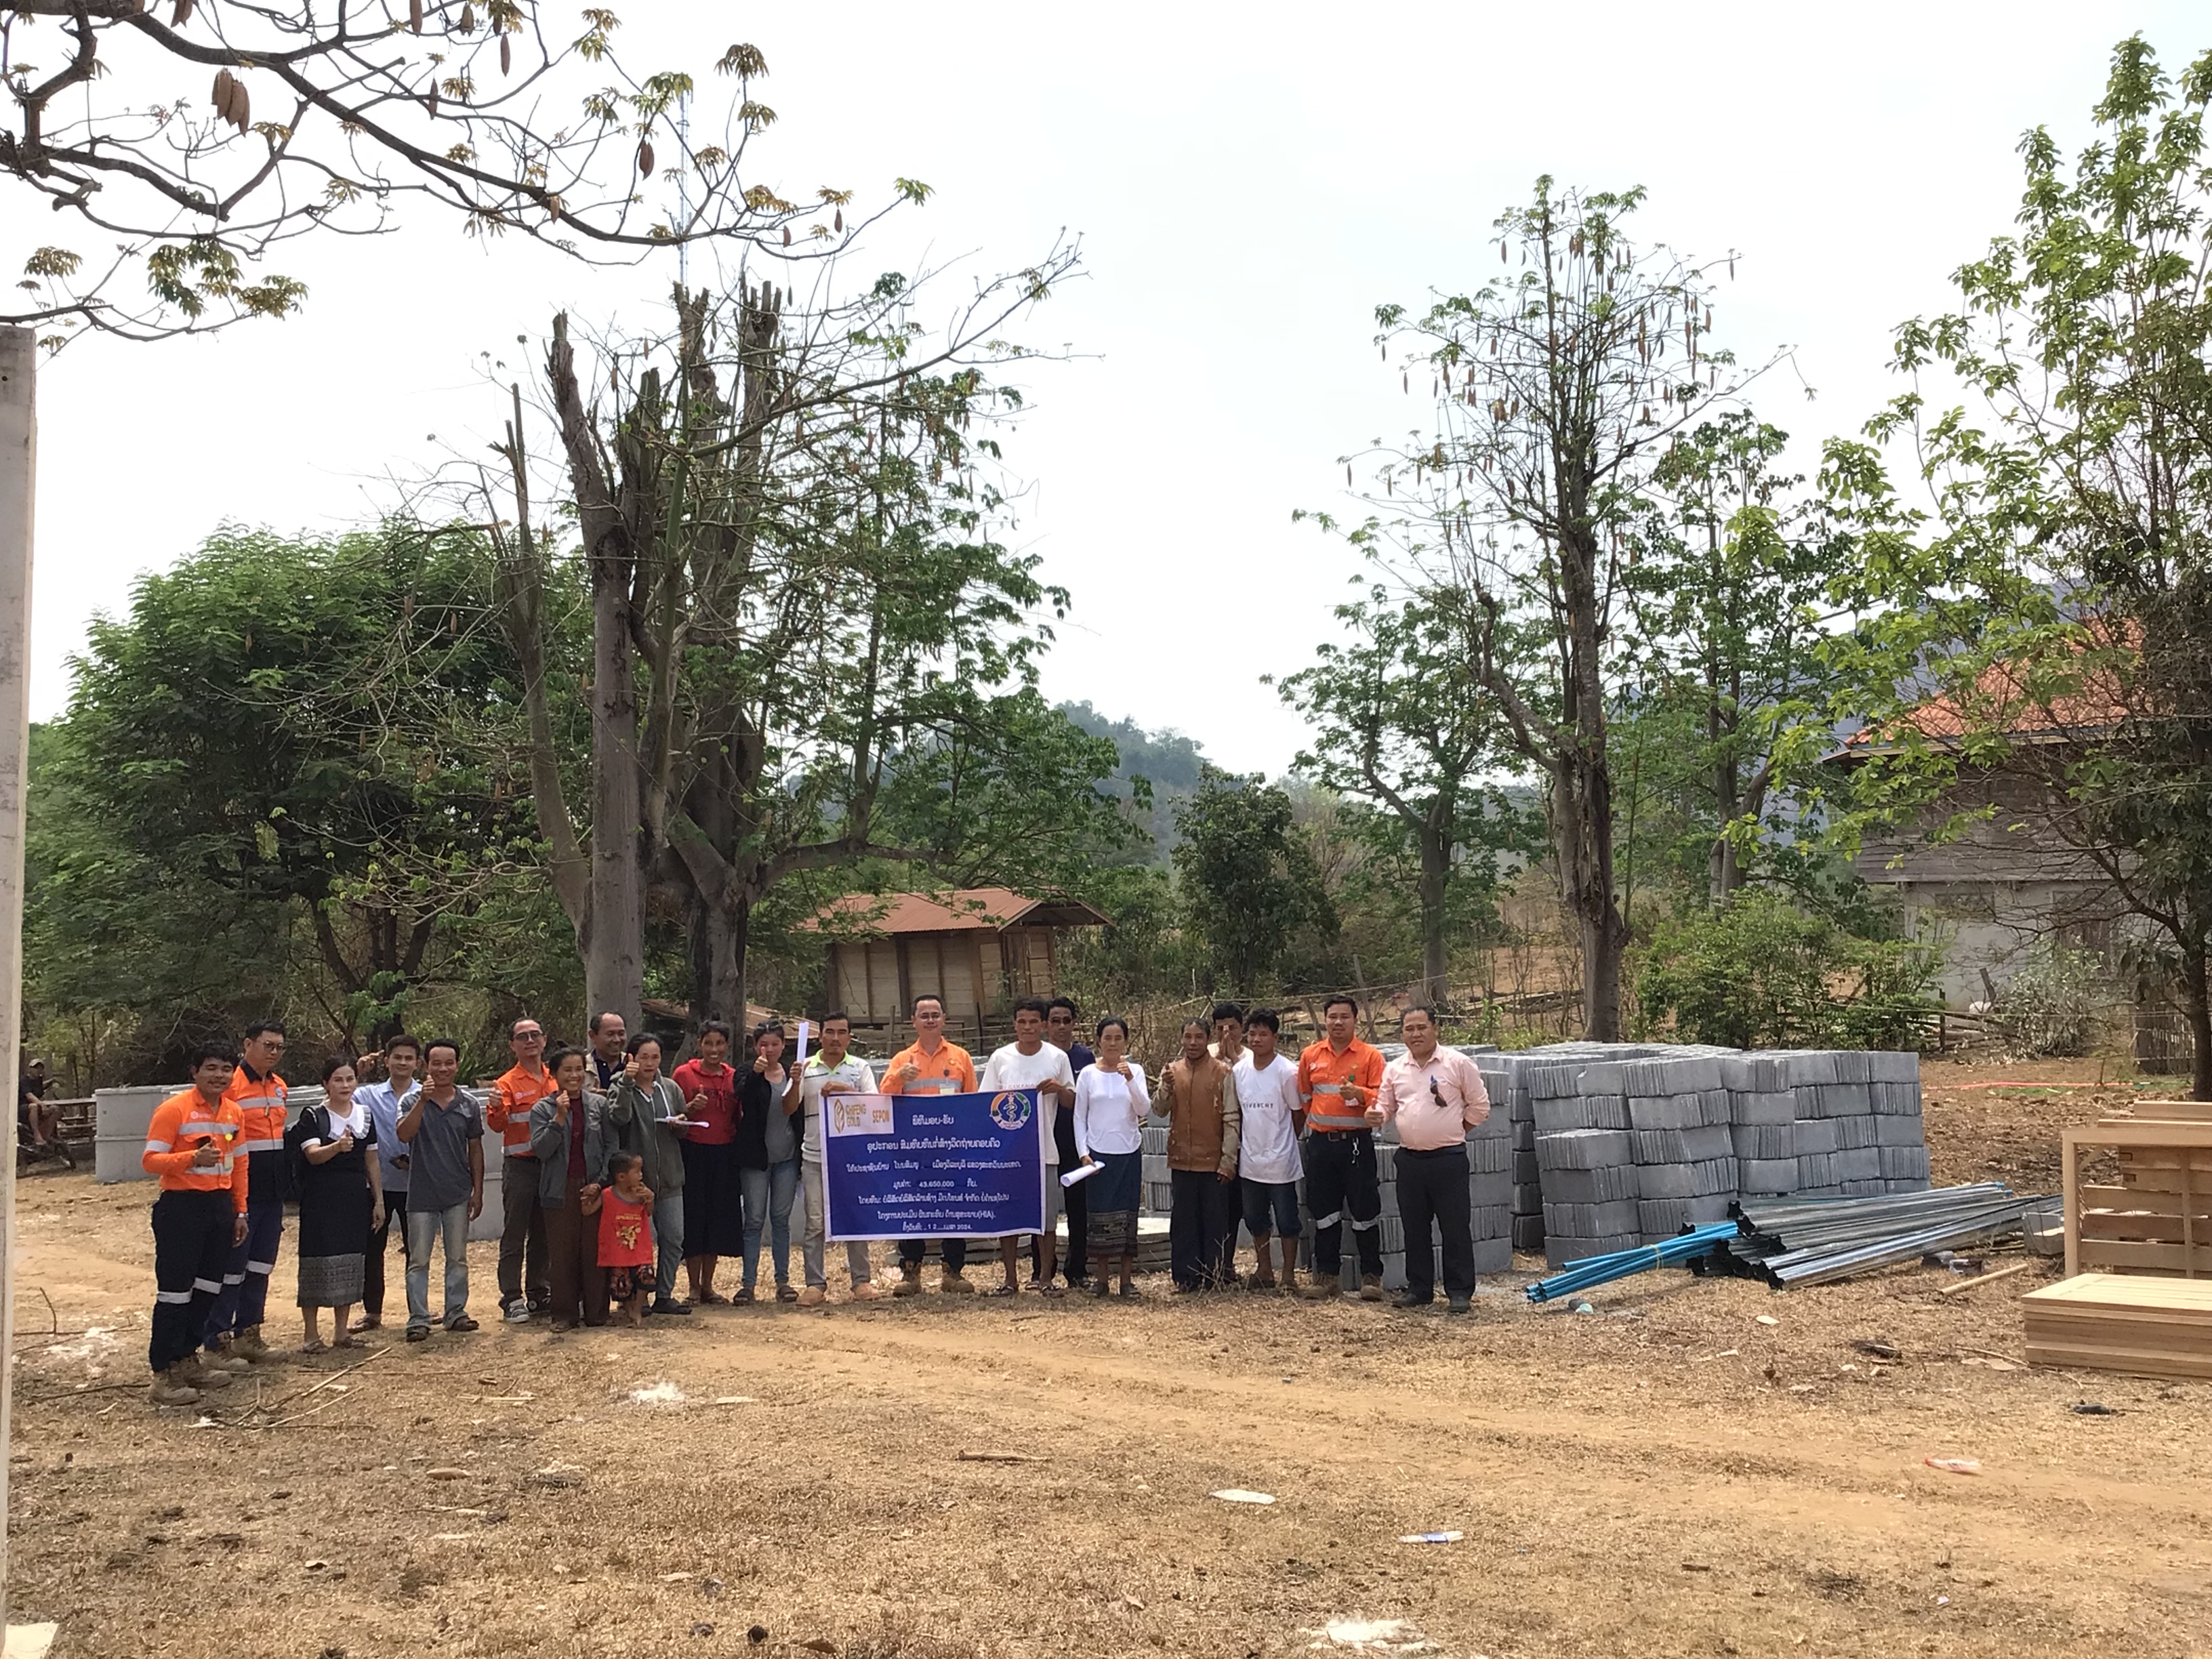 LXML Supports Latrine Construction Projects in the community around Sepon Mine